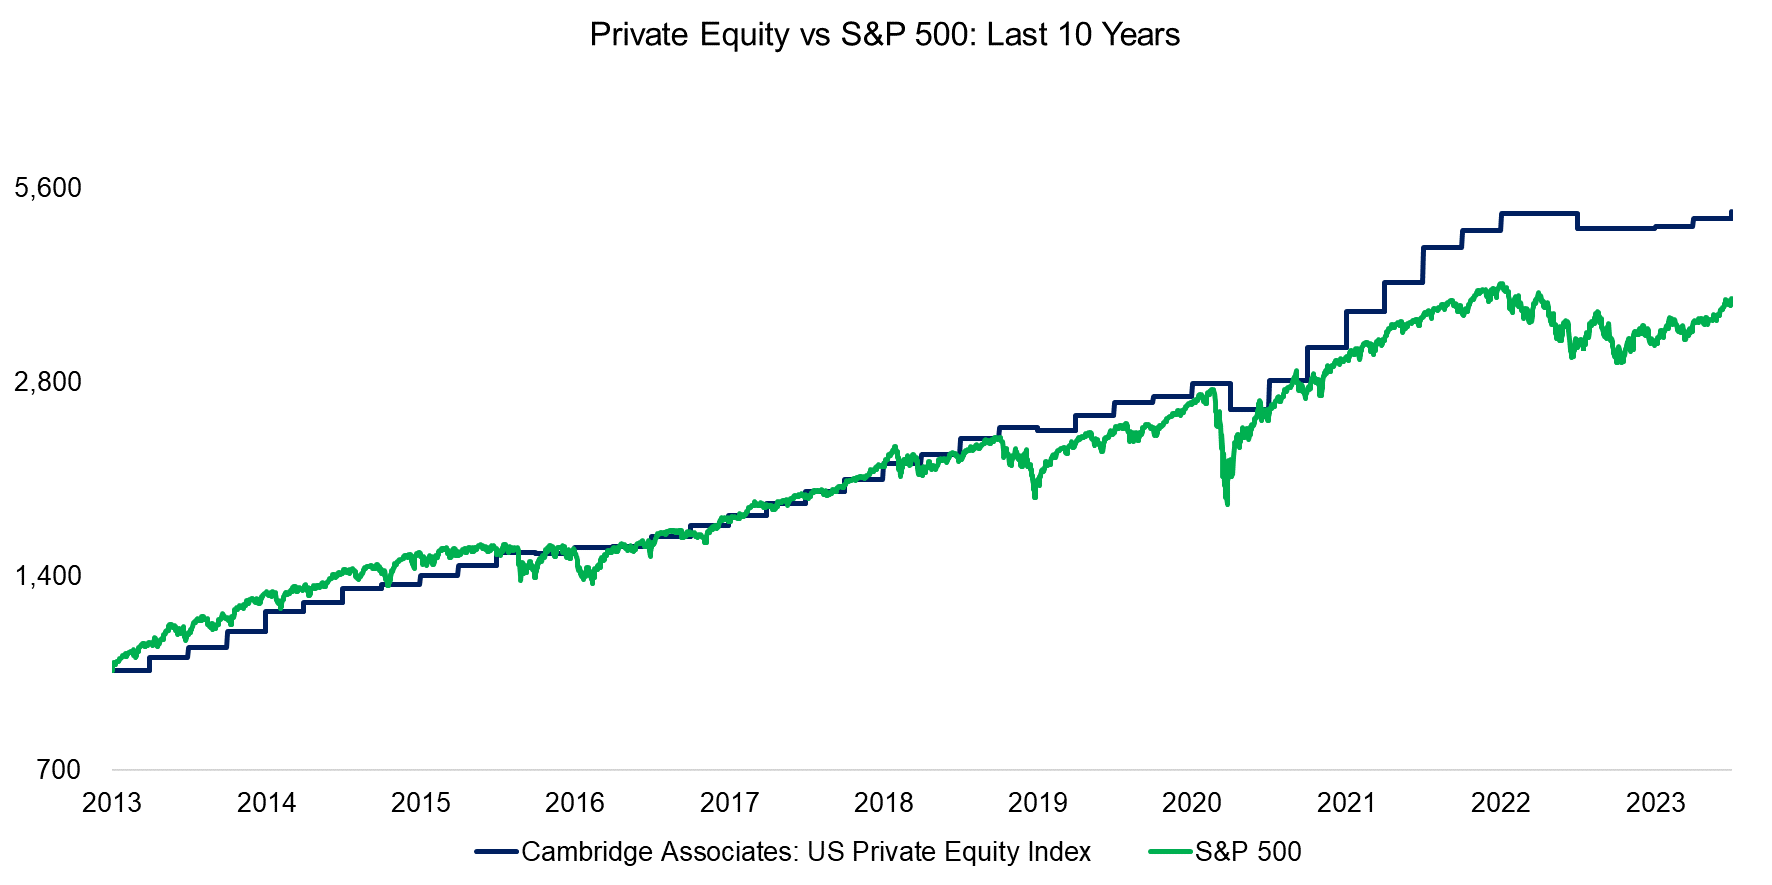 Private Equity vs S&P 500 Last 10 Years